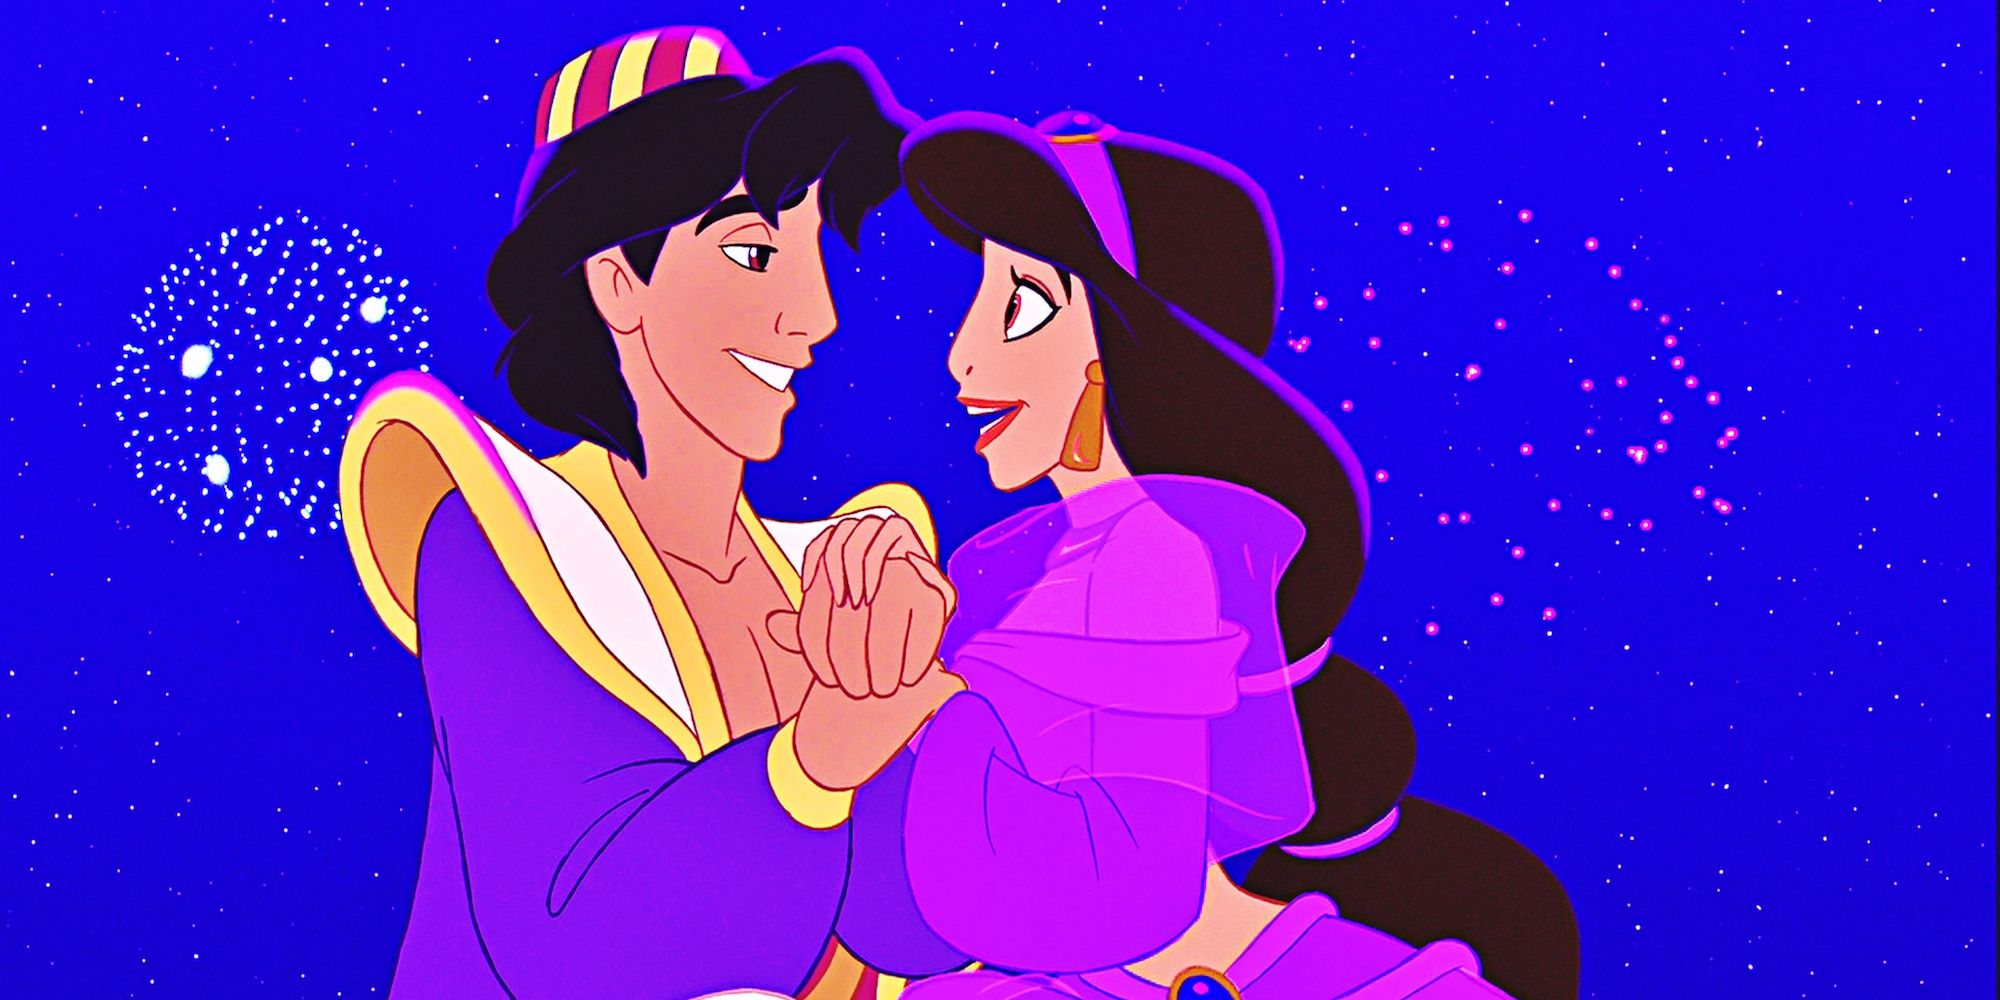 Aladdin and Jasmine singing together at the end of the animated movie